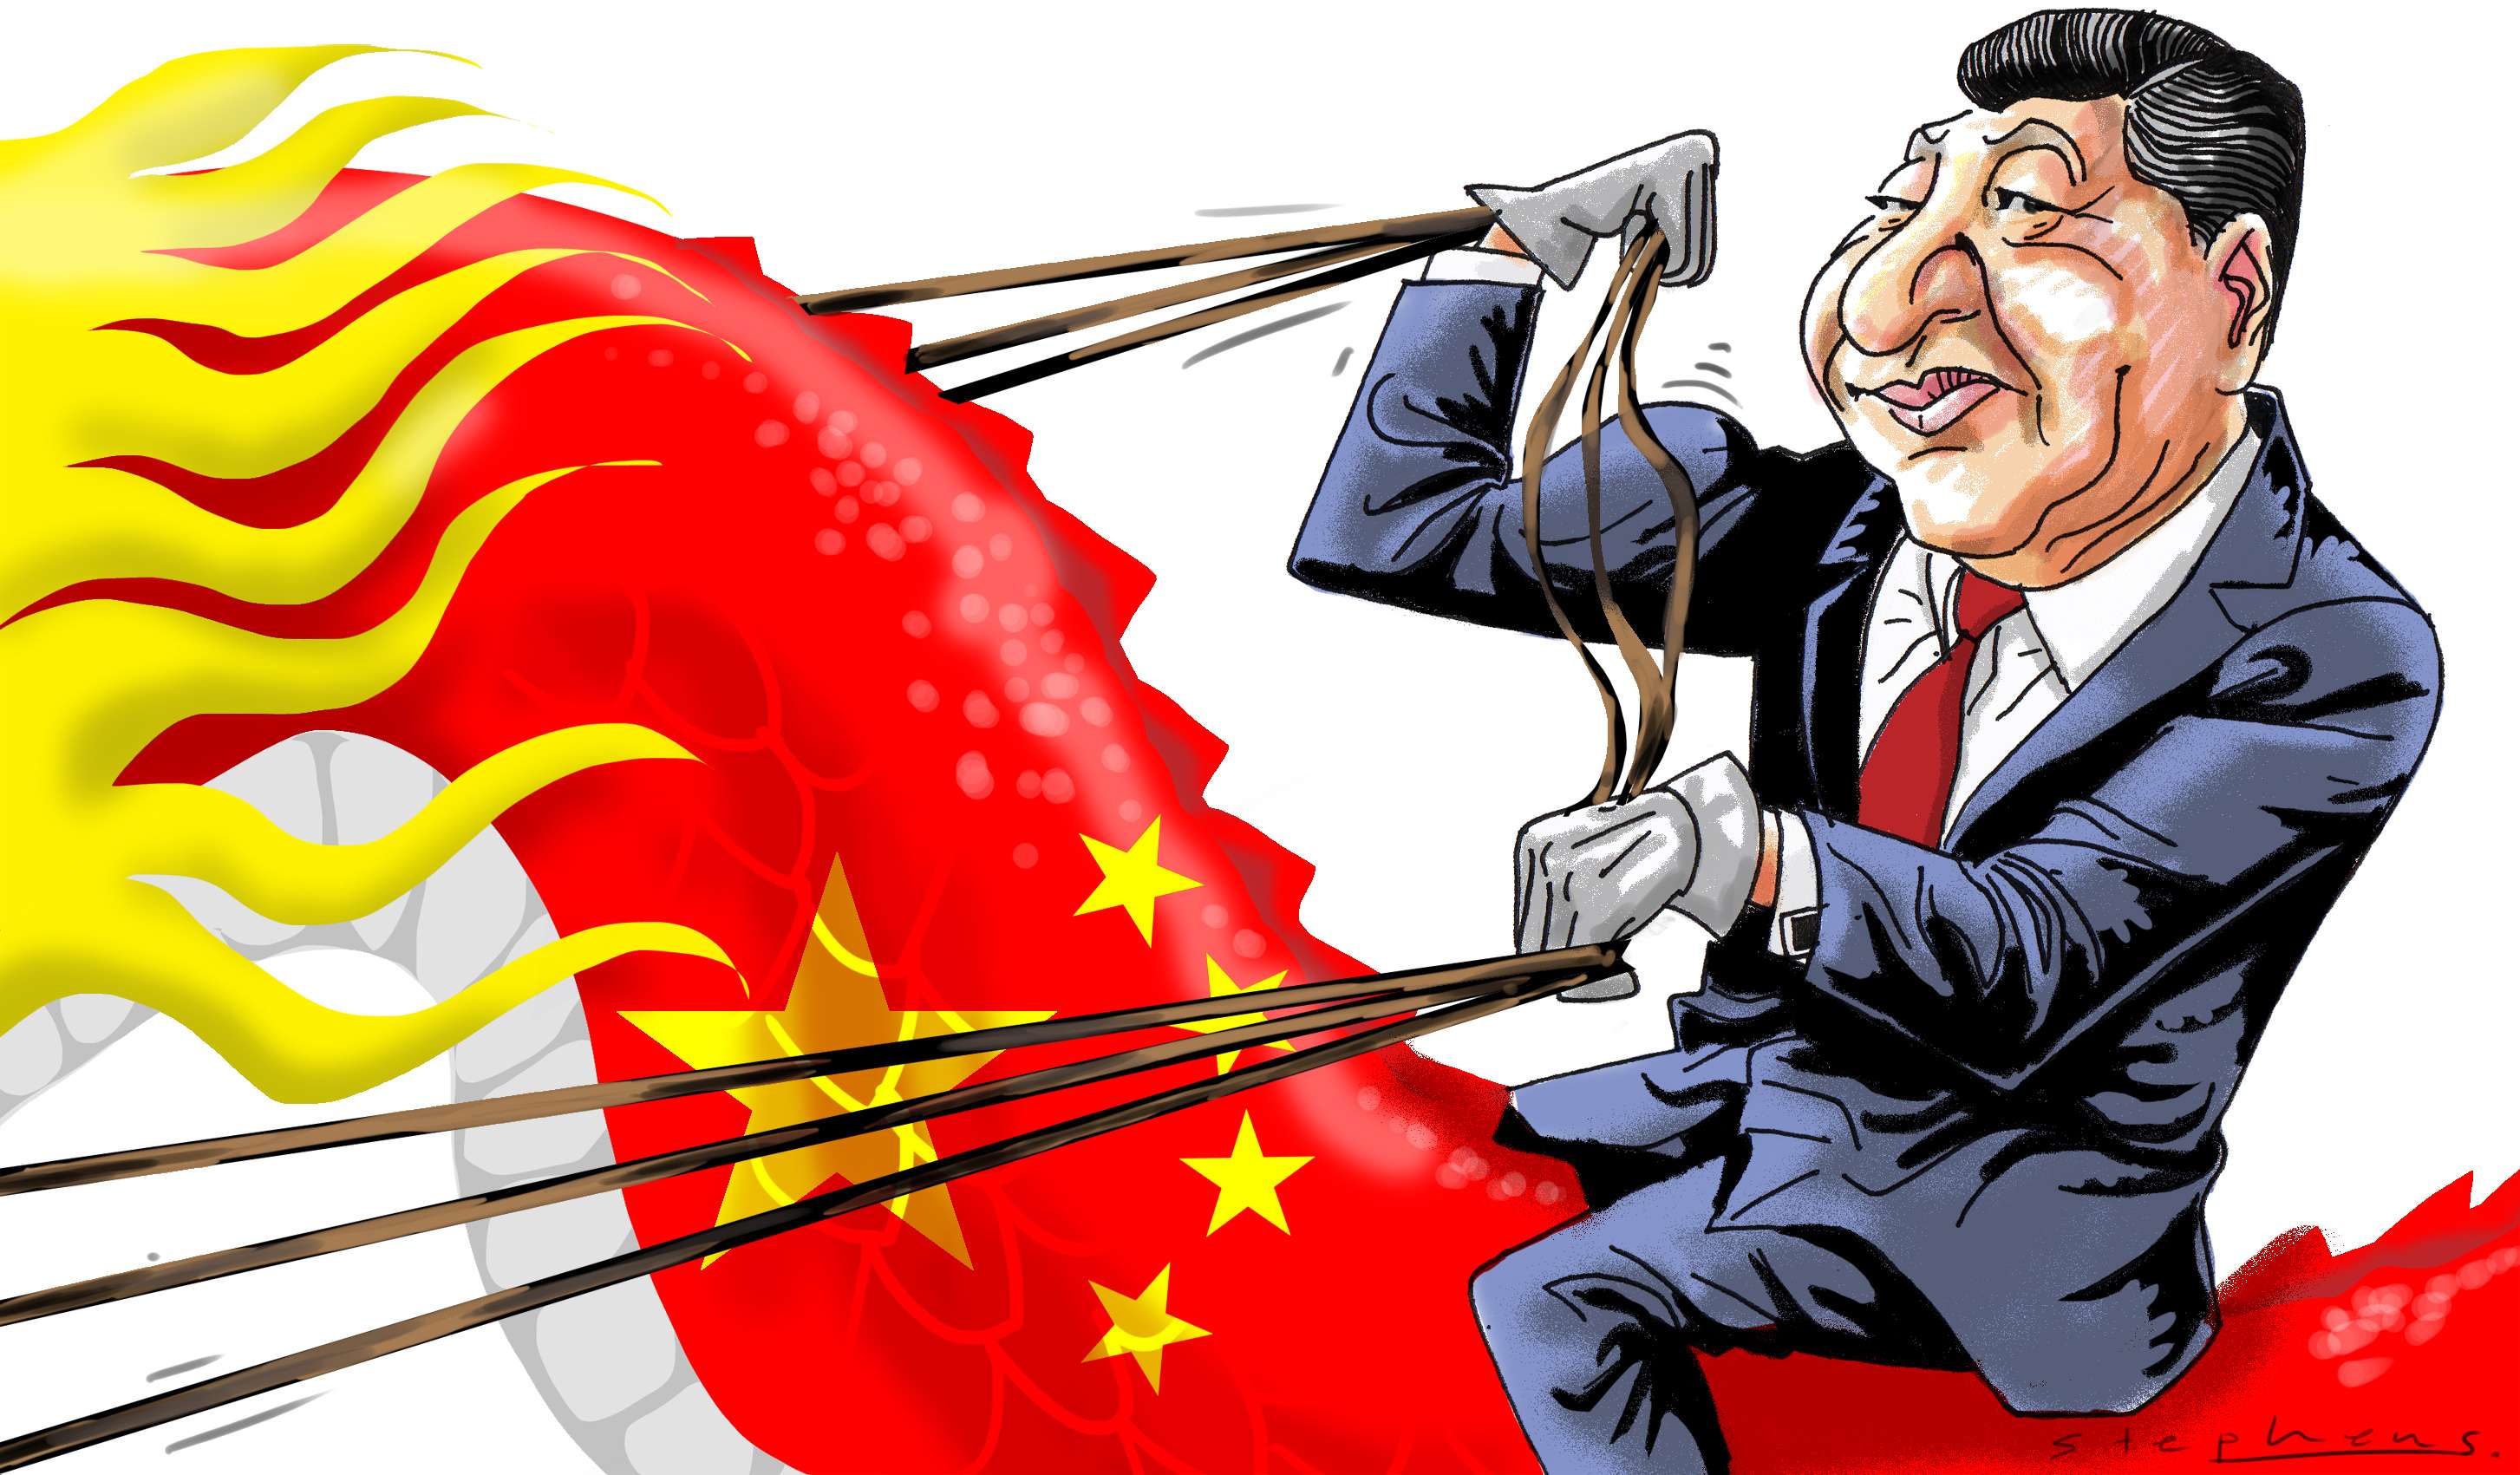 Robert Lawrence Kuhn says the key takeaway from China’s annual NPC and CPPCC meetings could not be clearer – that Xi Jinping’s status as core leader and the country’s core principles of governance are non-negotiable